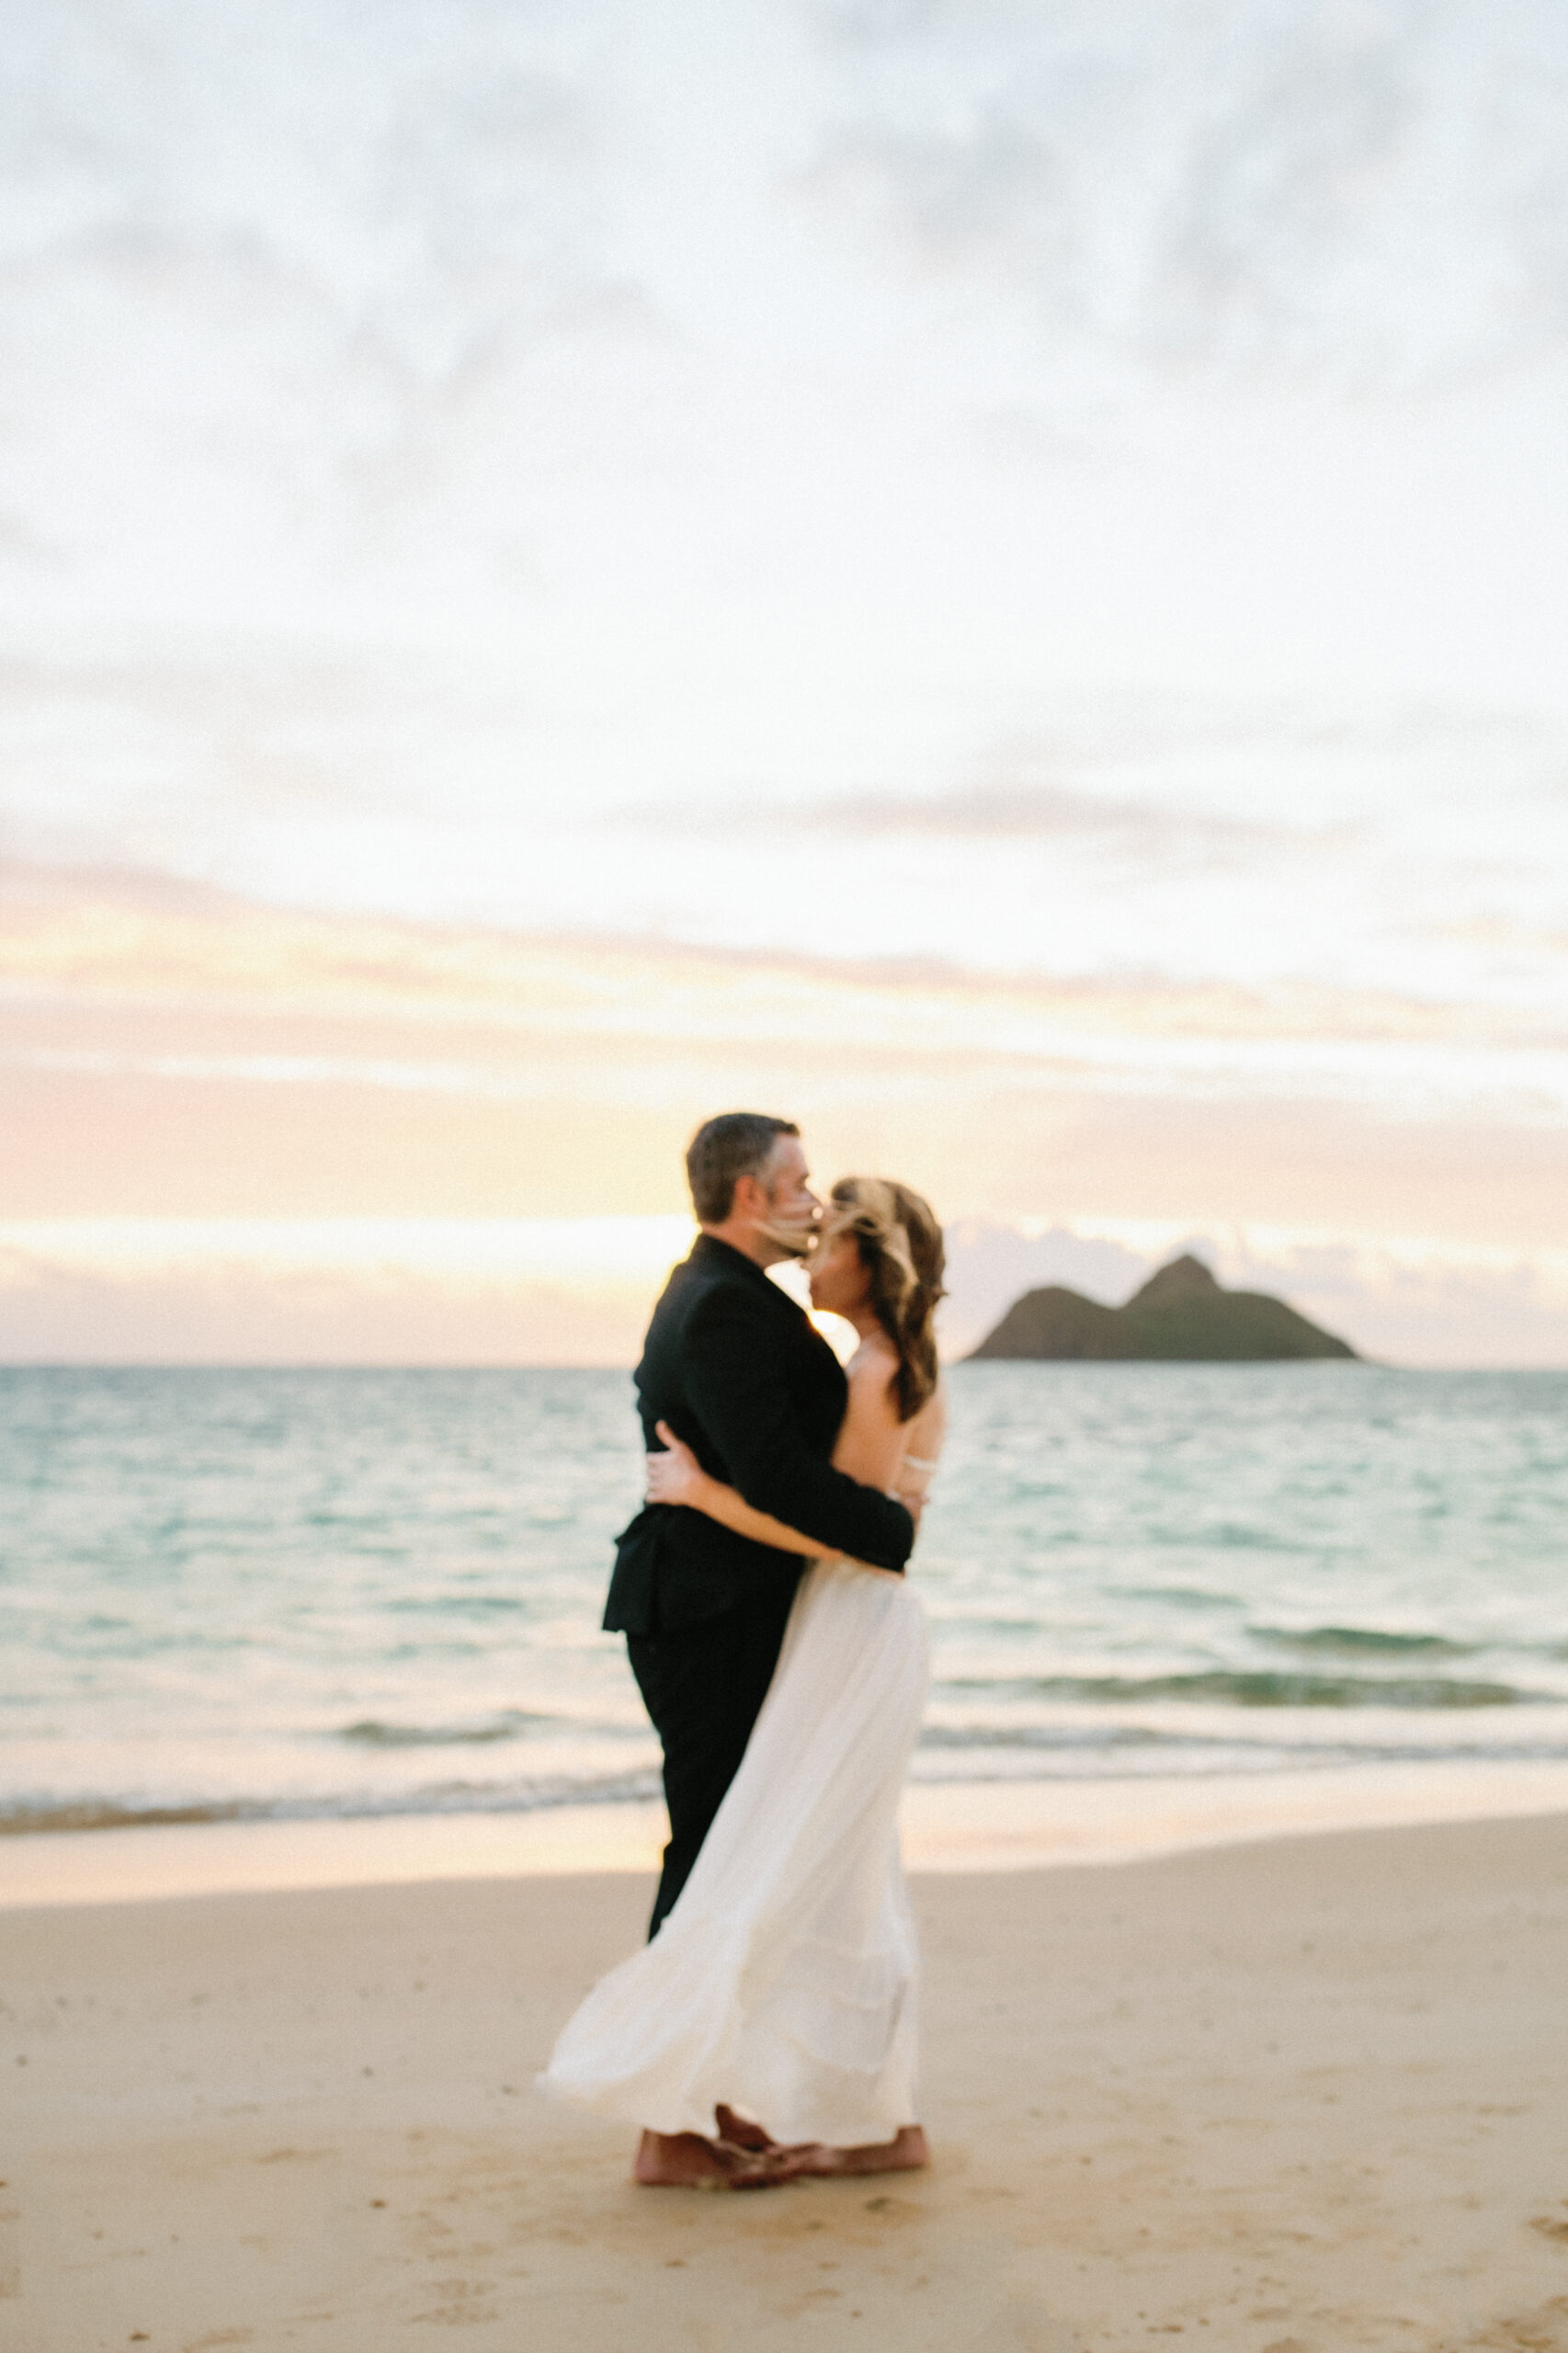 oahu beach brandon and vao couples photography annie groves 18 scaled